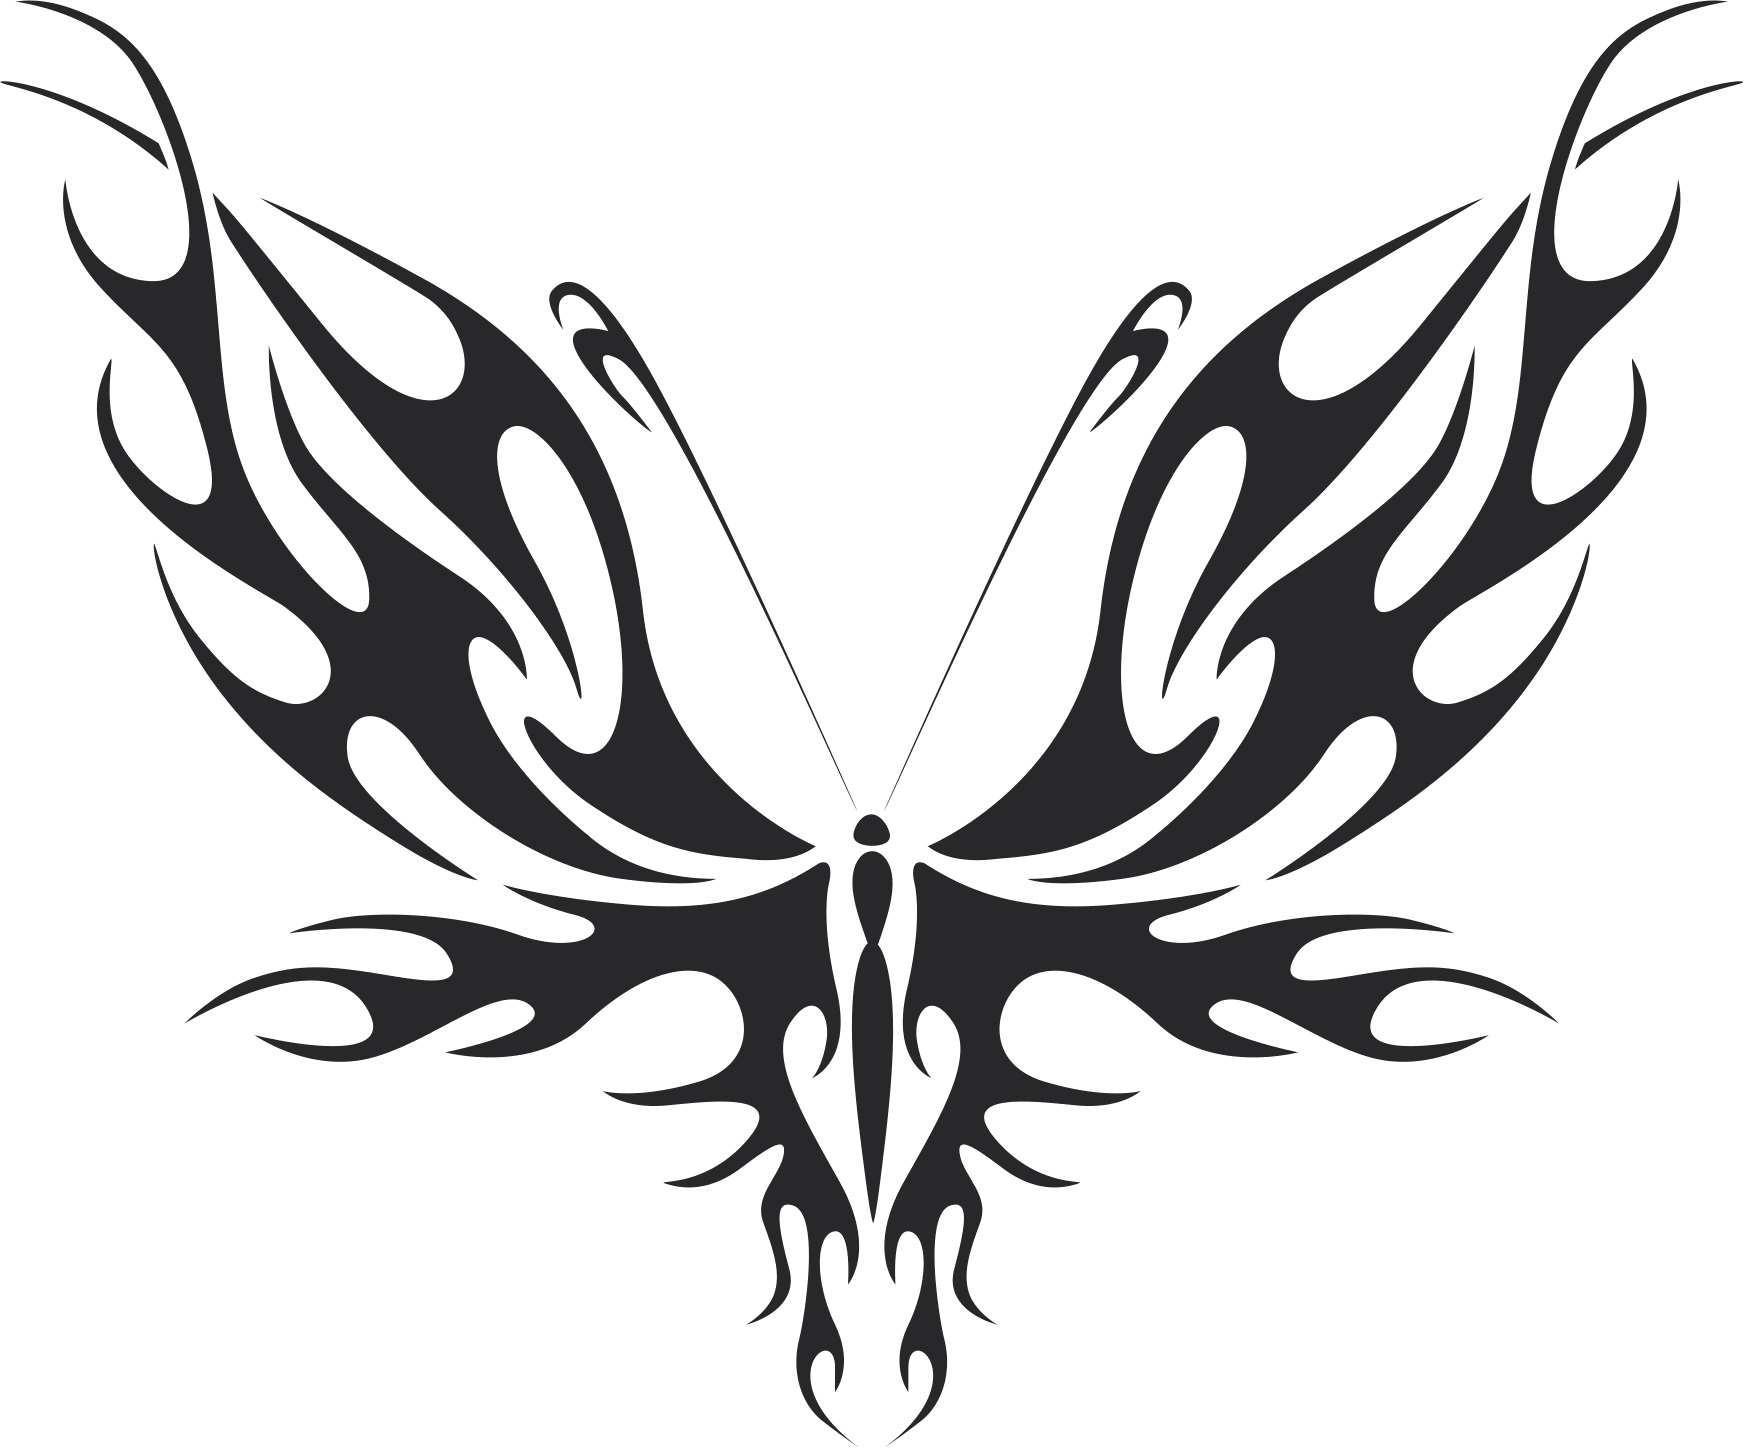 Tribal Butterfly Vector Art 55 Free DXF Vectors File